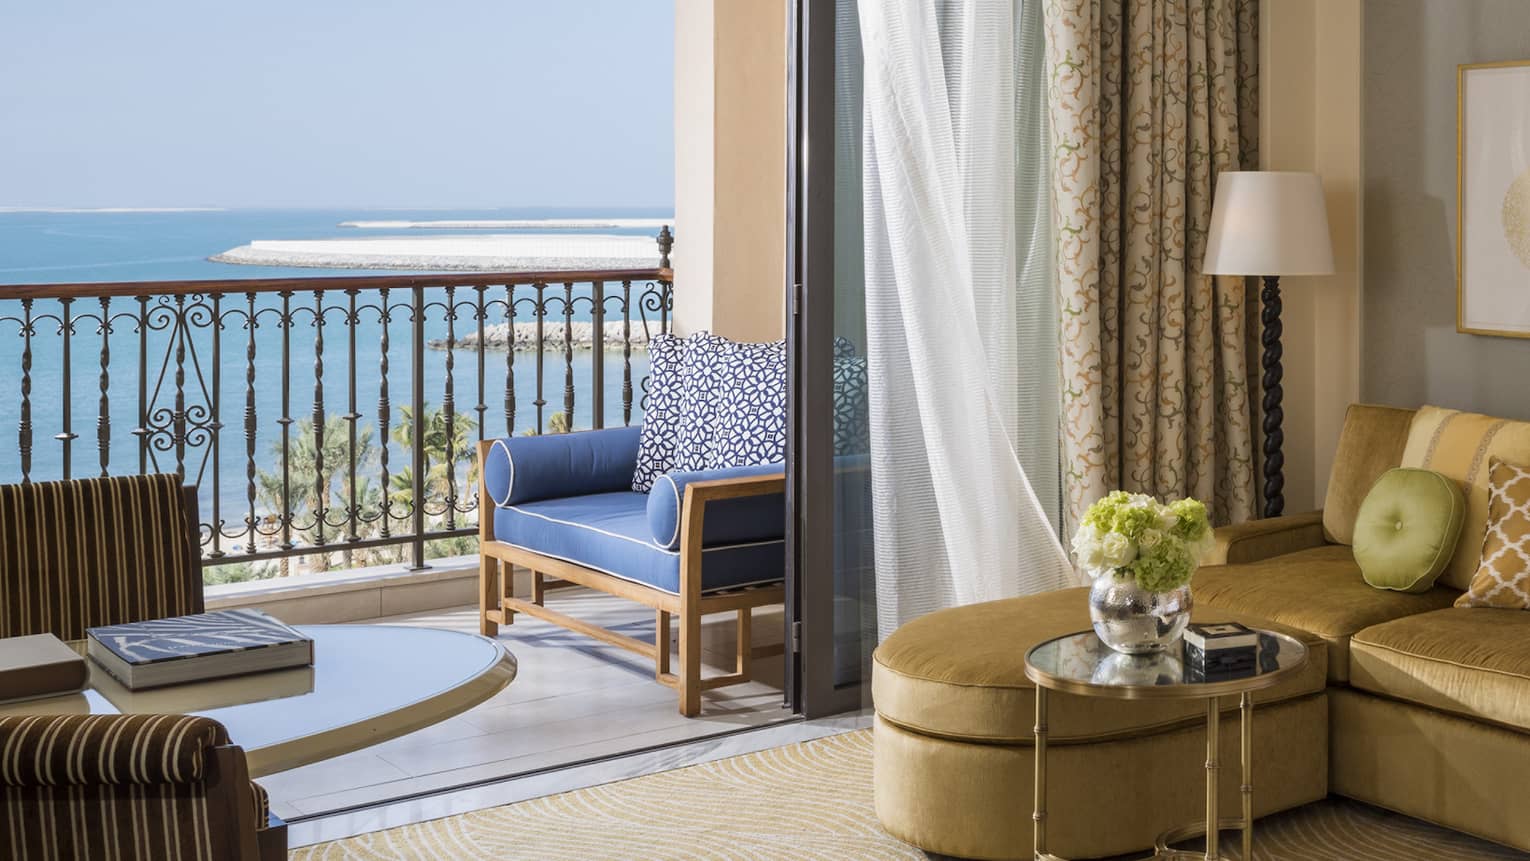 luxury hotel room with elegant decor and sea view